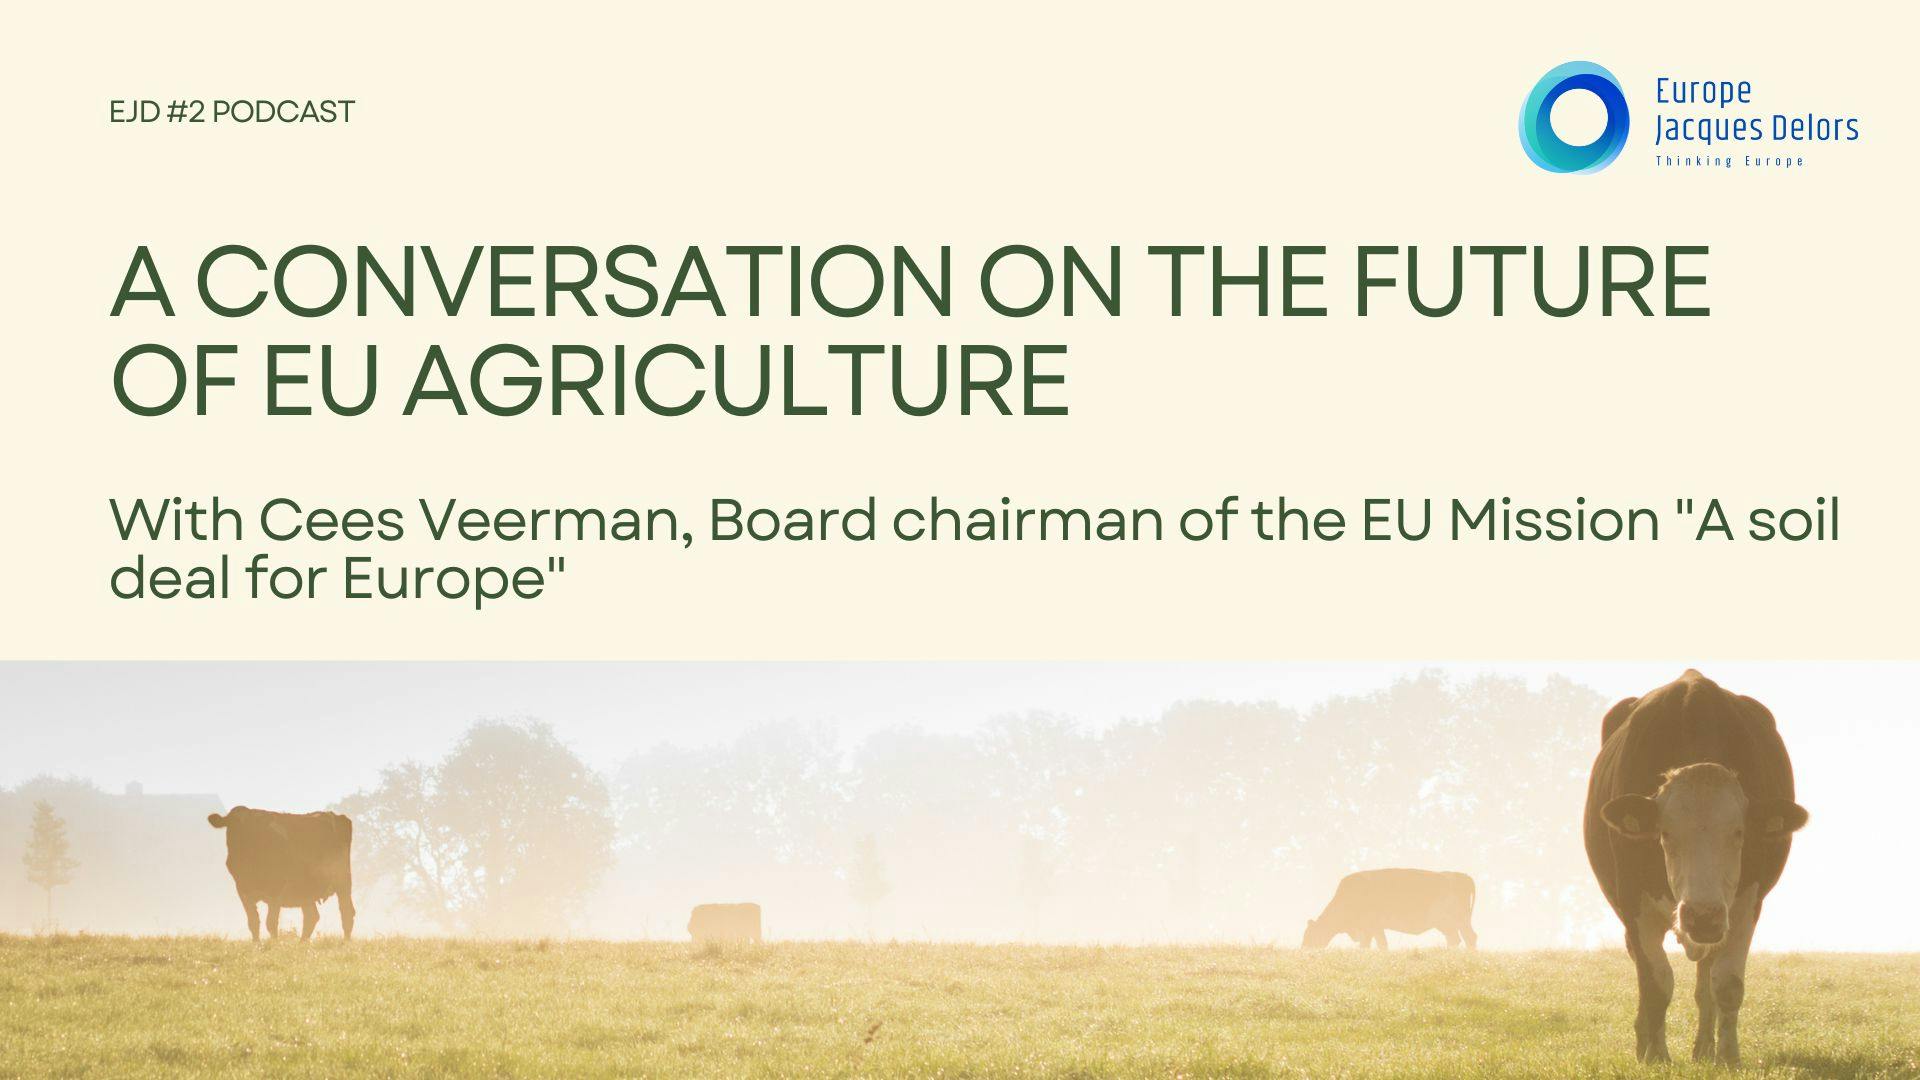 EJD Podcast: #2 Conversation with Cees Veerman on the future of EU agriculture 